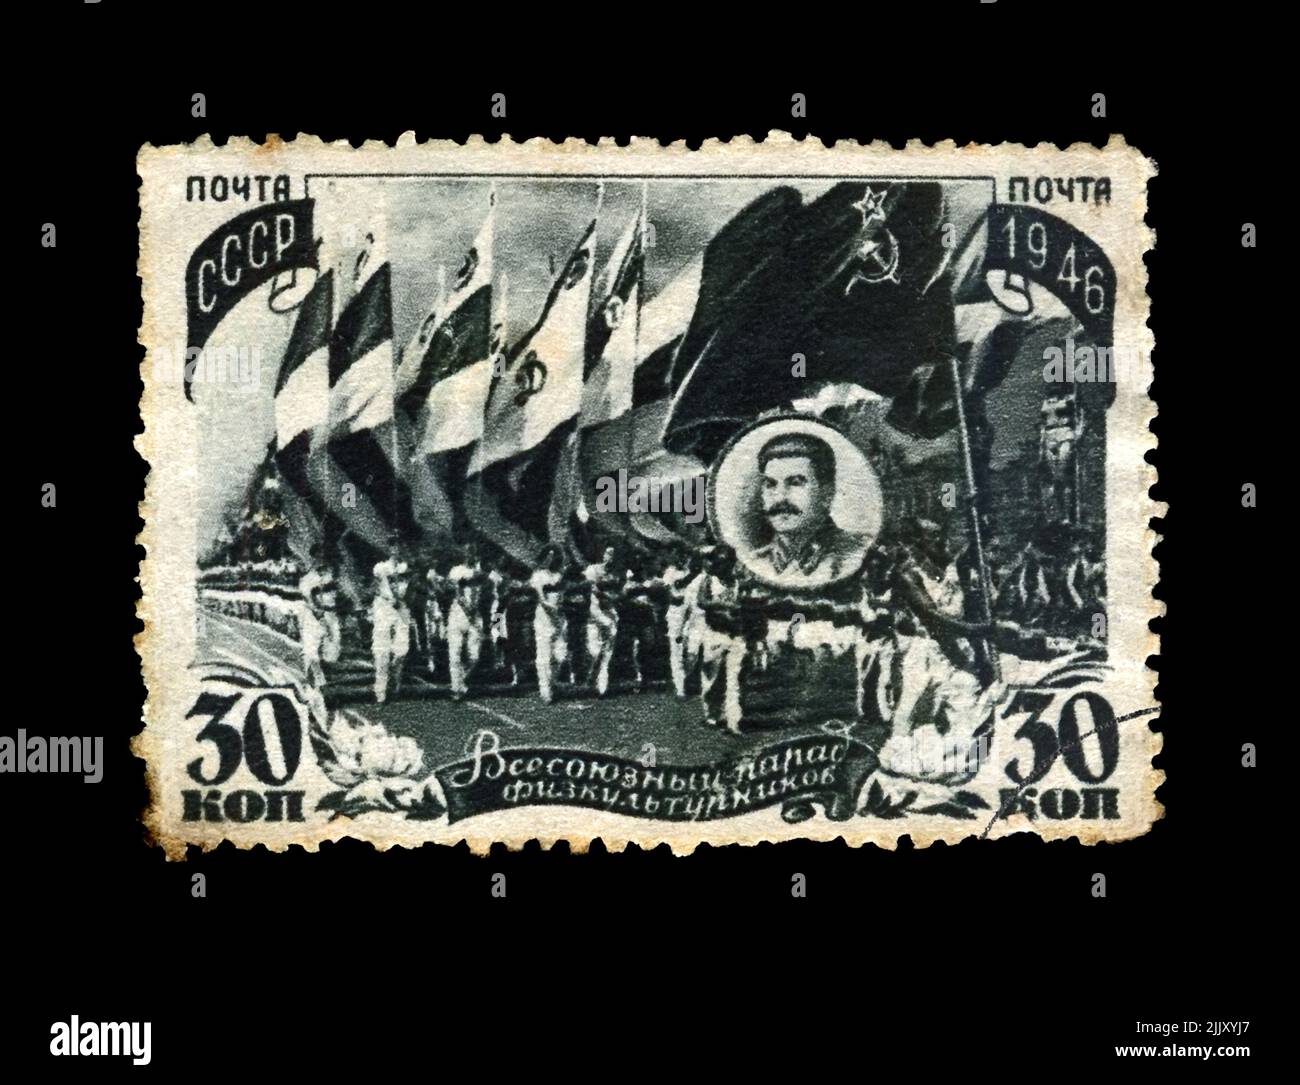 All-Union Parade of Physical Culturists (sportsmans), circa 1946. Vintage post stamp printed in the USSR isolated on black background. Stock Photo